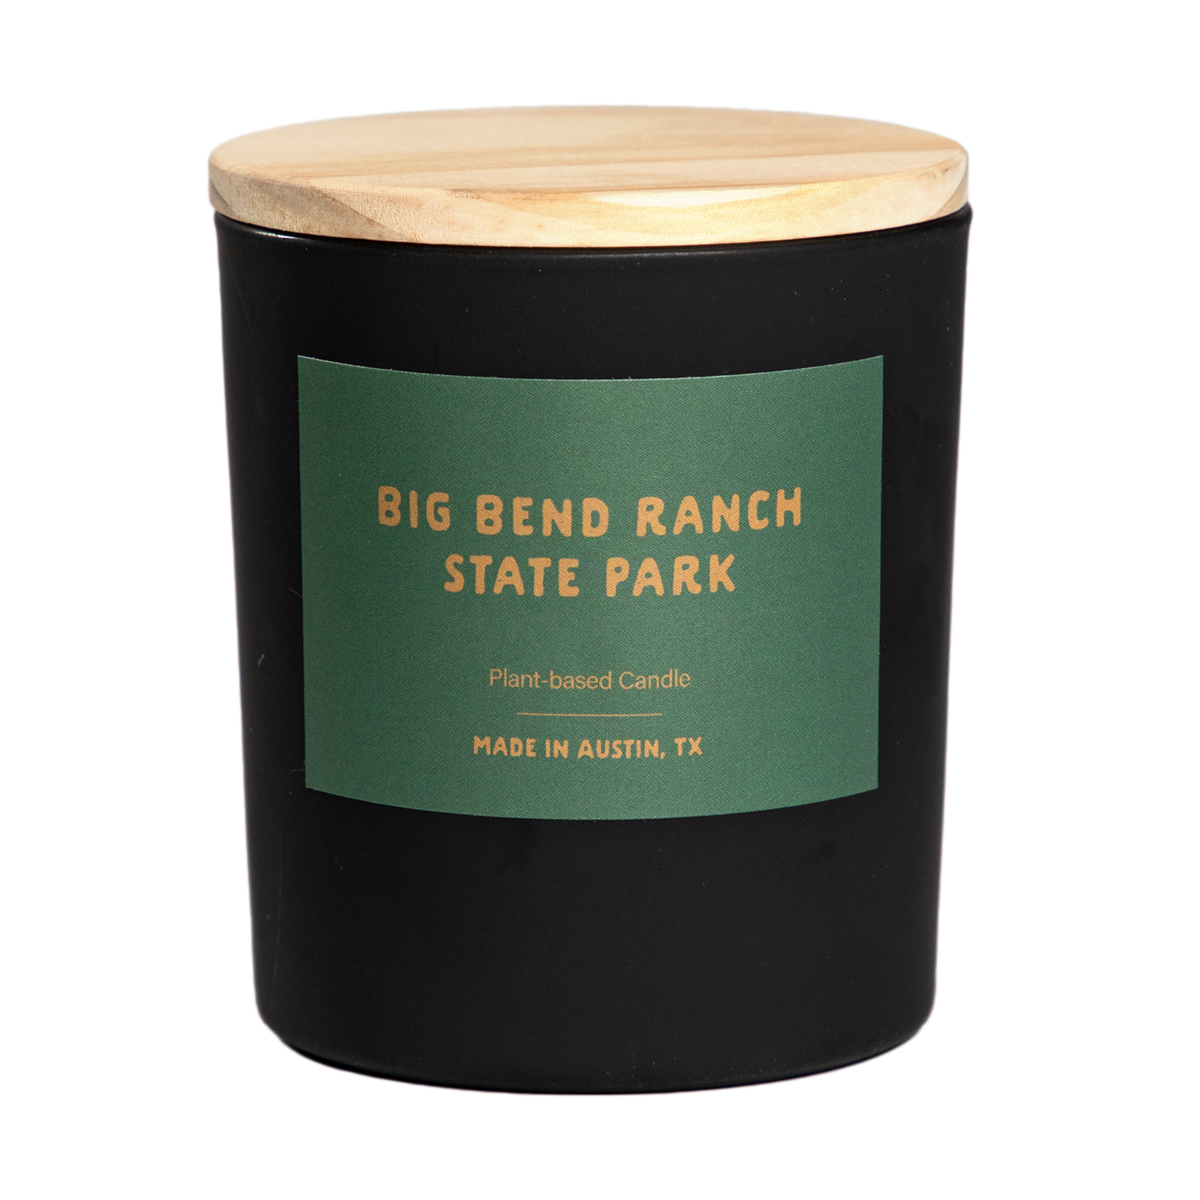 Big Bend Ranch State Park Candle, 11 oz.